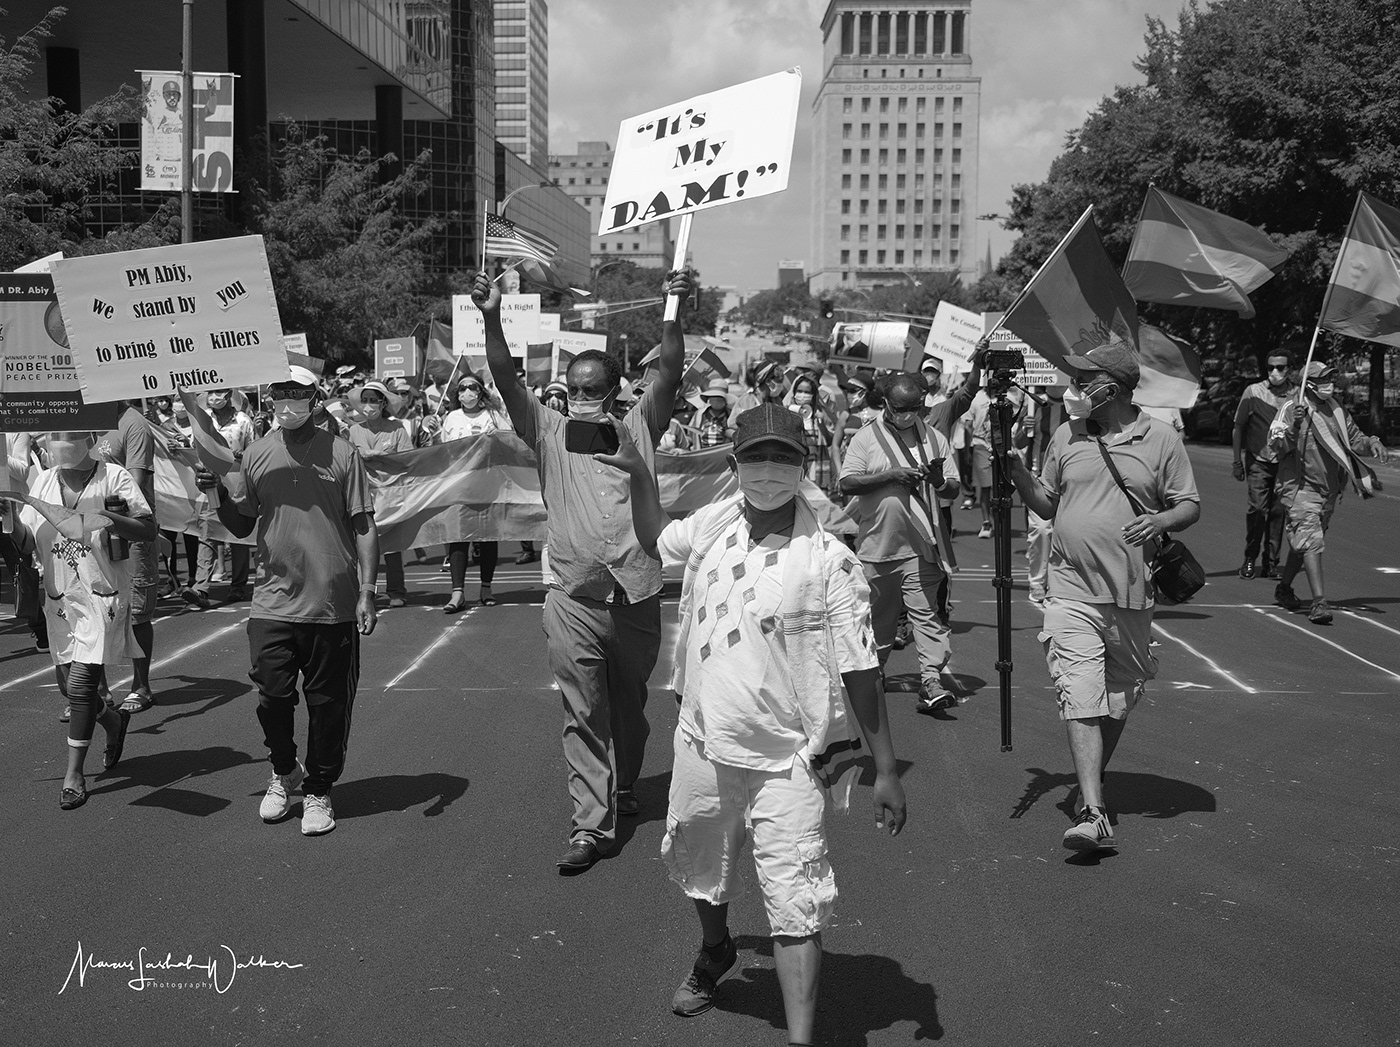 editorial ETHOPIA ethopian Fujifilm X100V photographer Photography  protest protests st louis